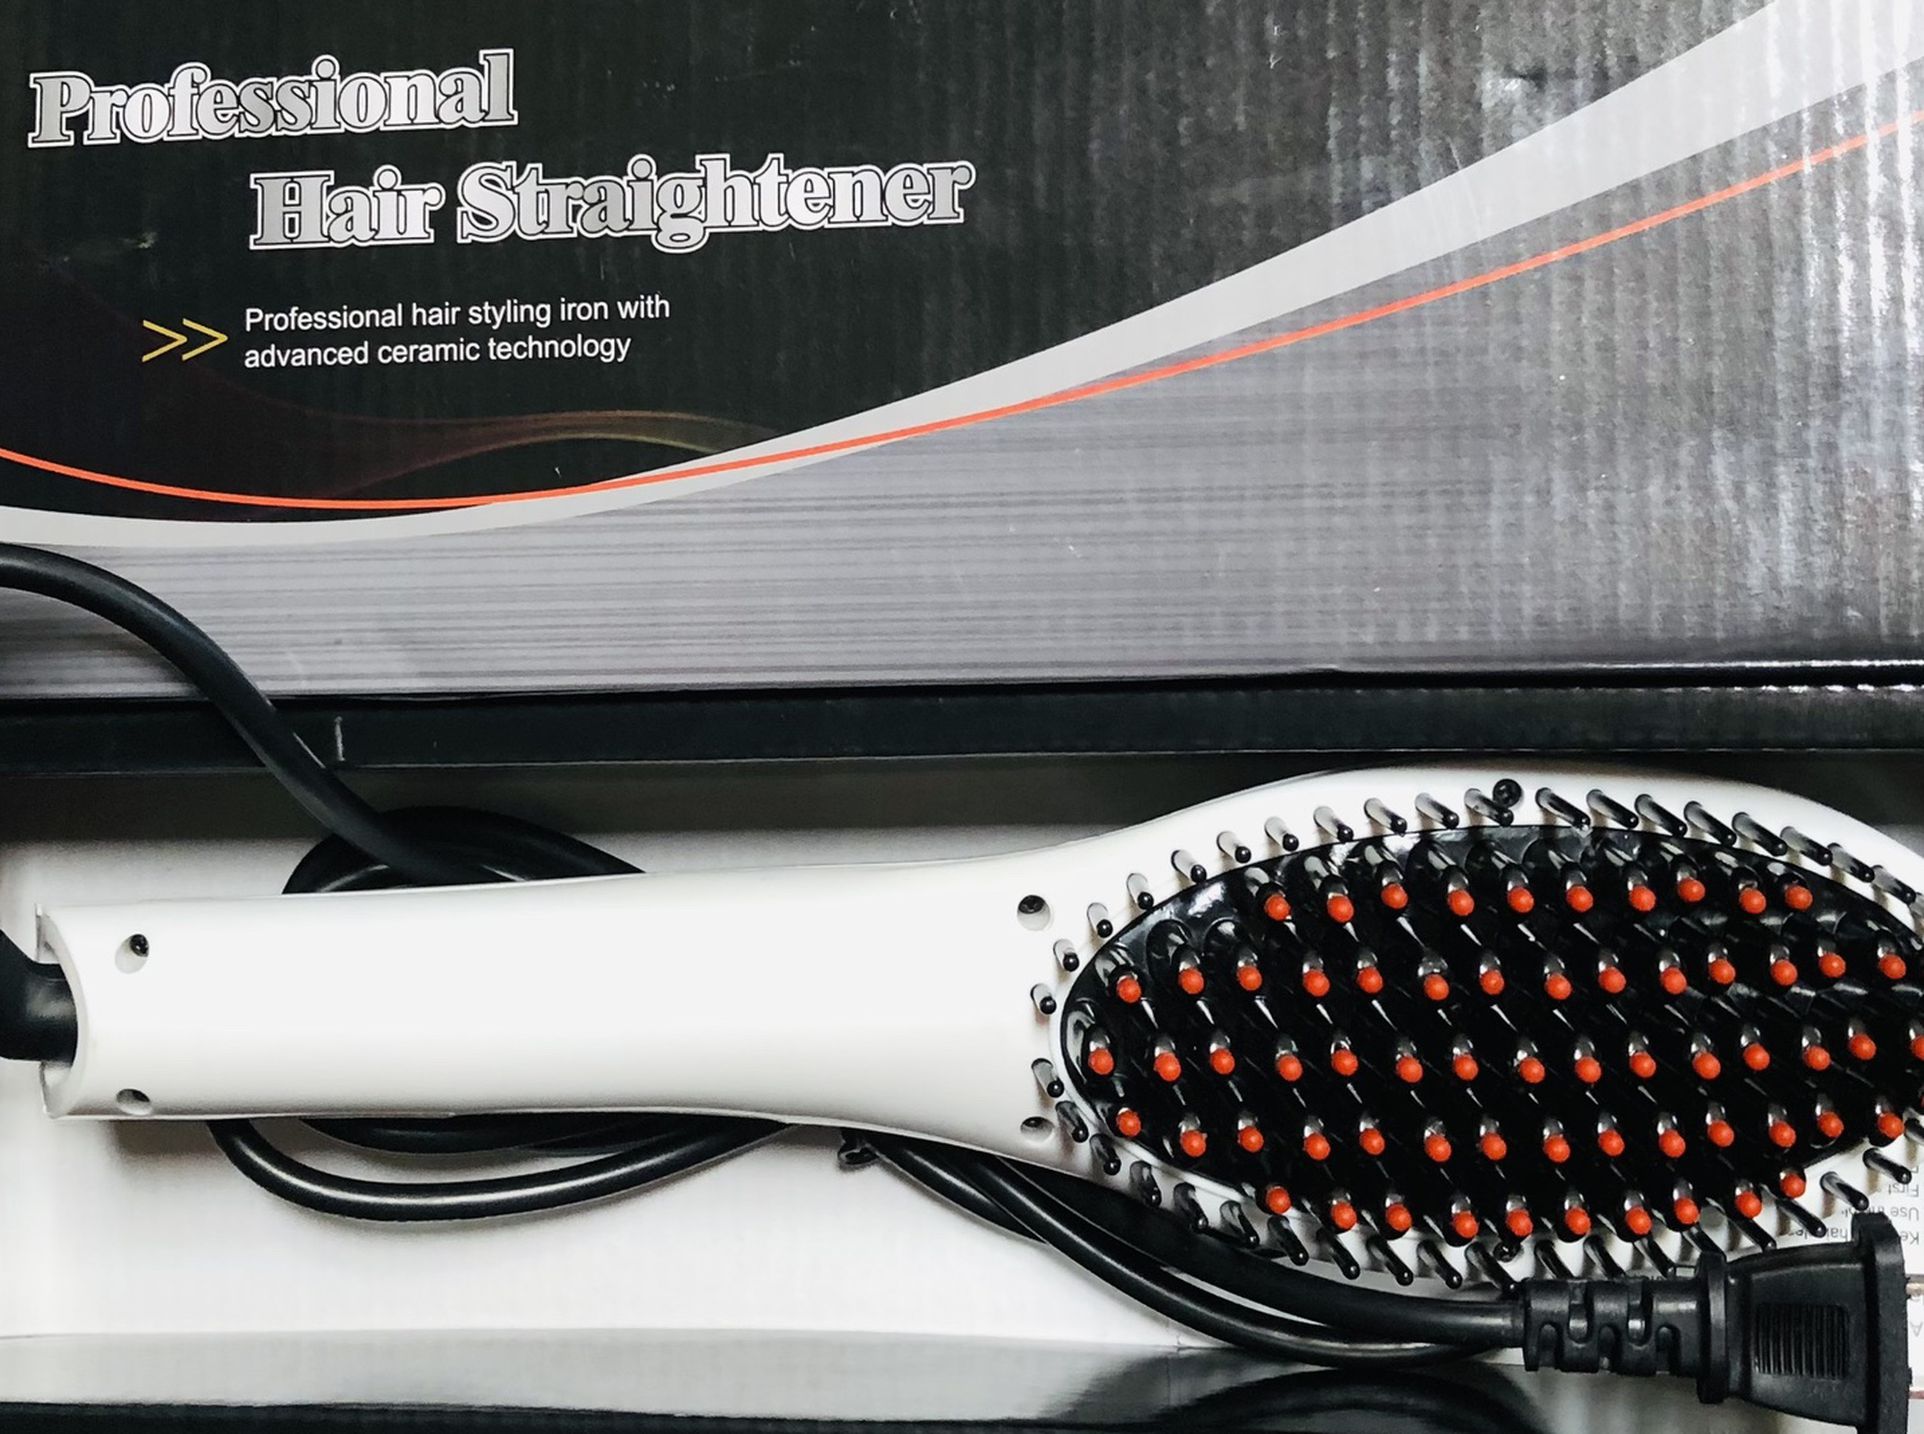 New professional hair straightener brush silver and white